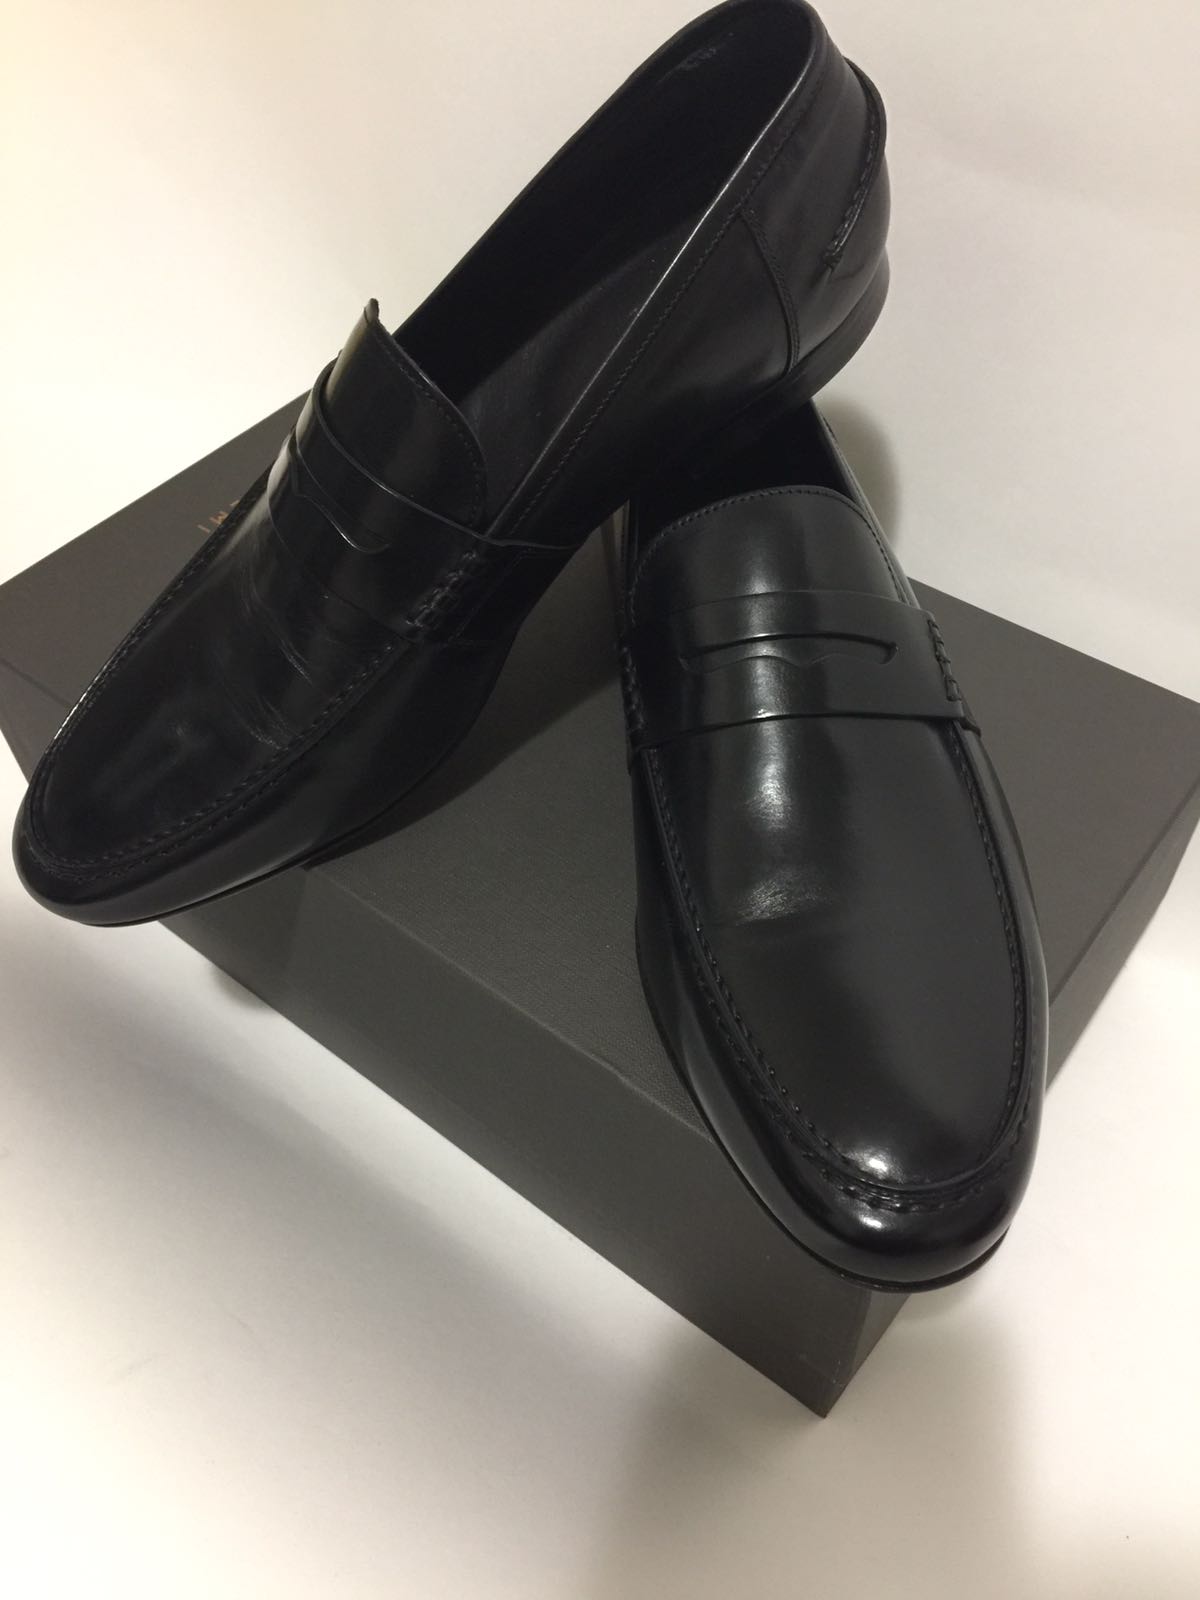 A Review of the M. Gemi Volo Loafer: The 1-Year Old Shoe Brand That's A ...